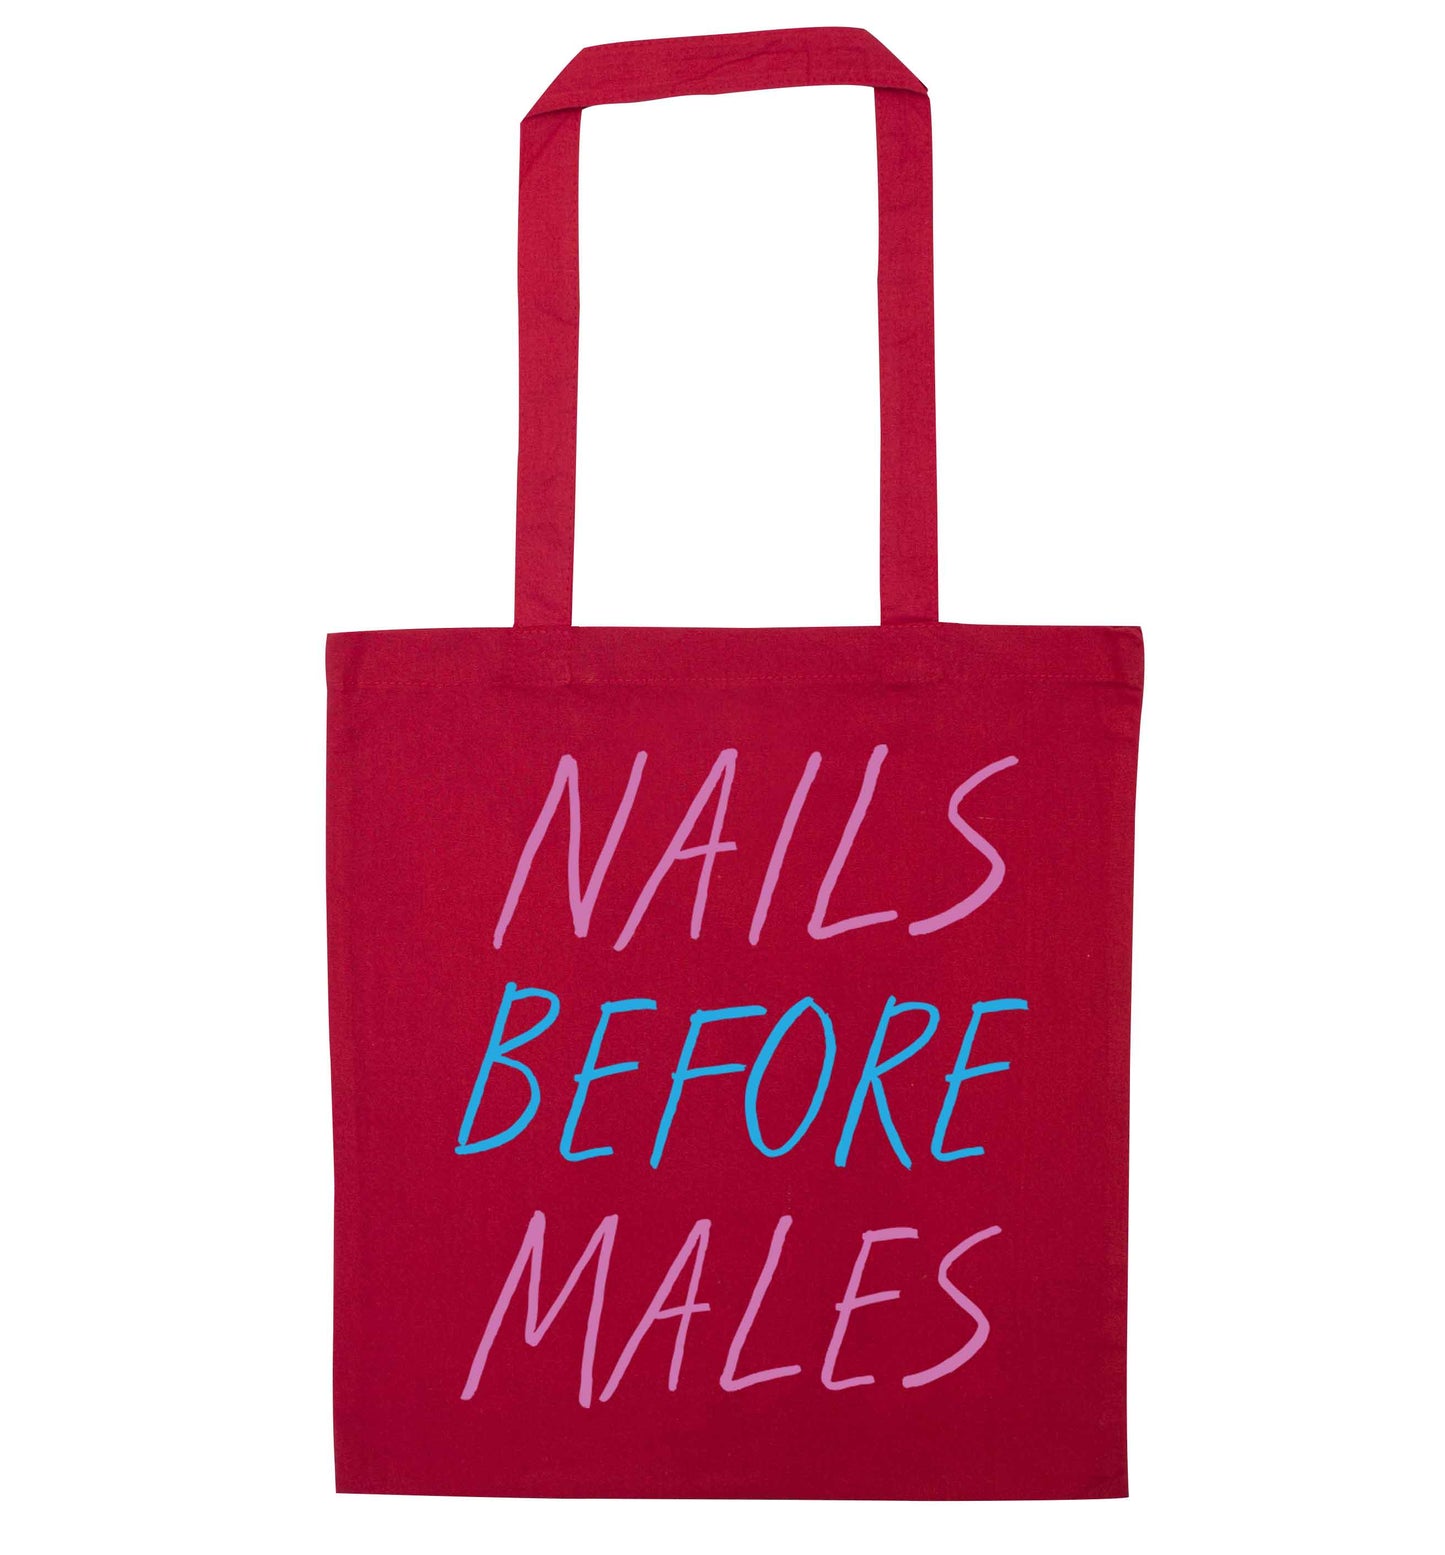 Nails before males red tote bag